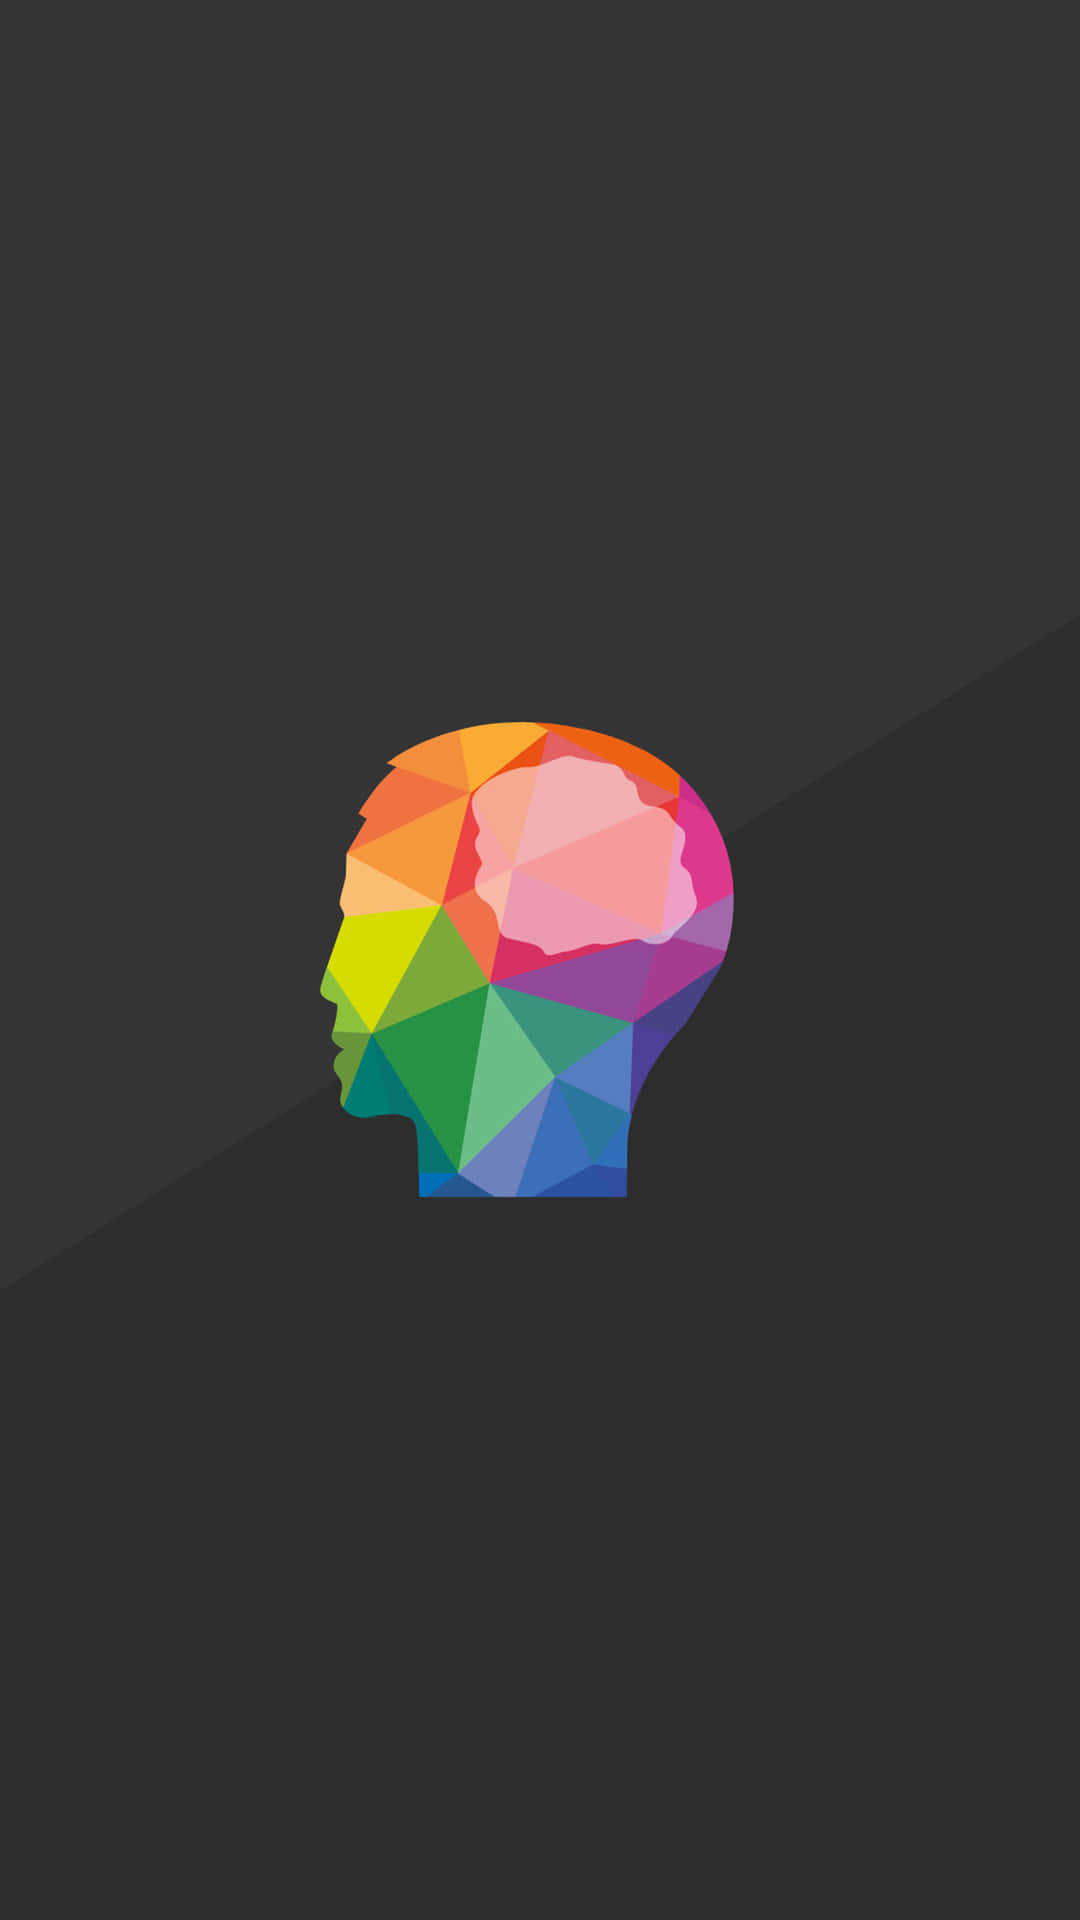 A Colorful Logo Of A Human Head Background